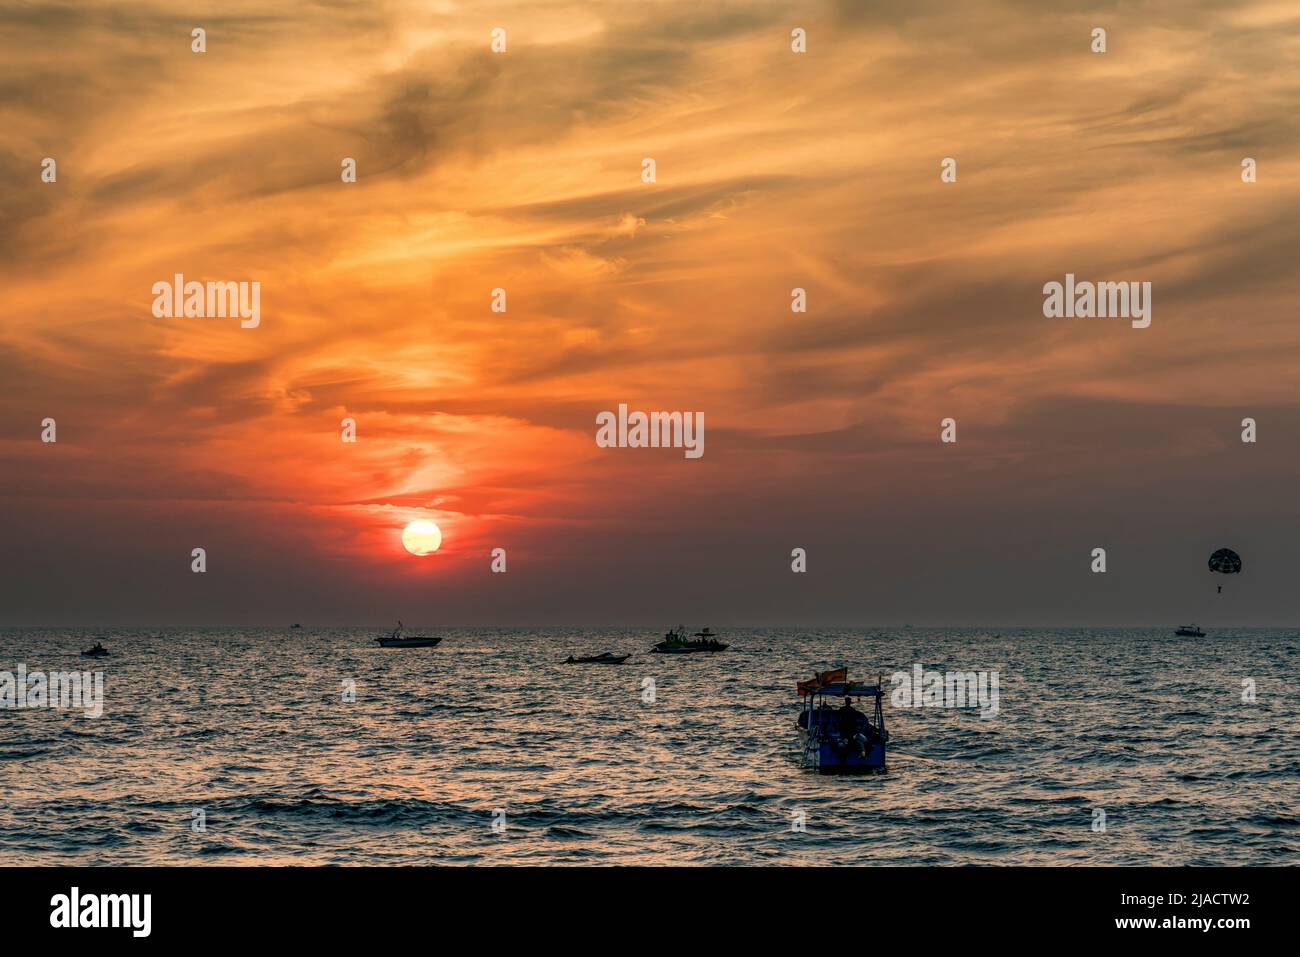 Scenic Sunset on beach in South Asia, tropical evening Stock Photo